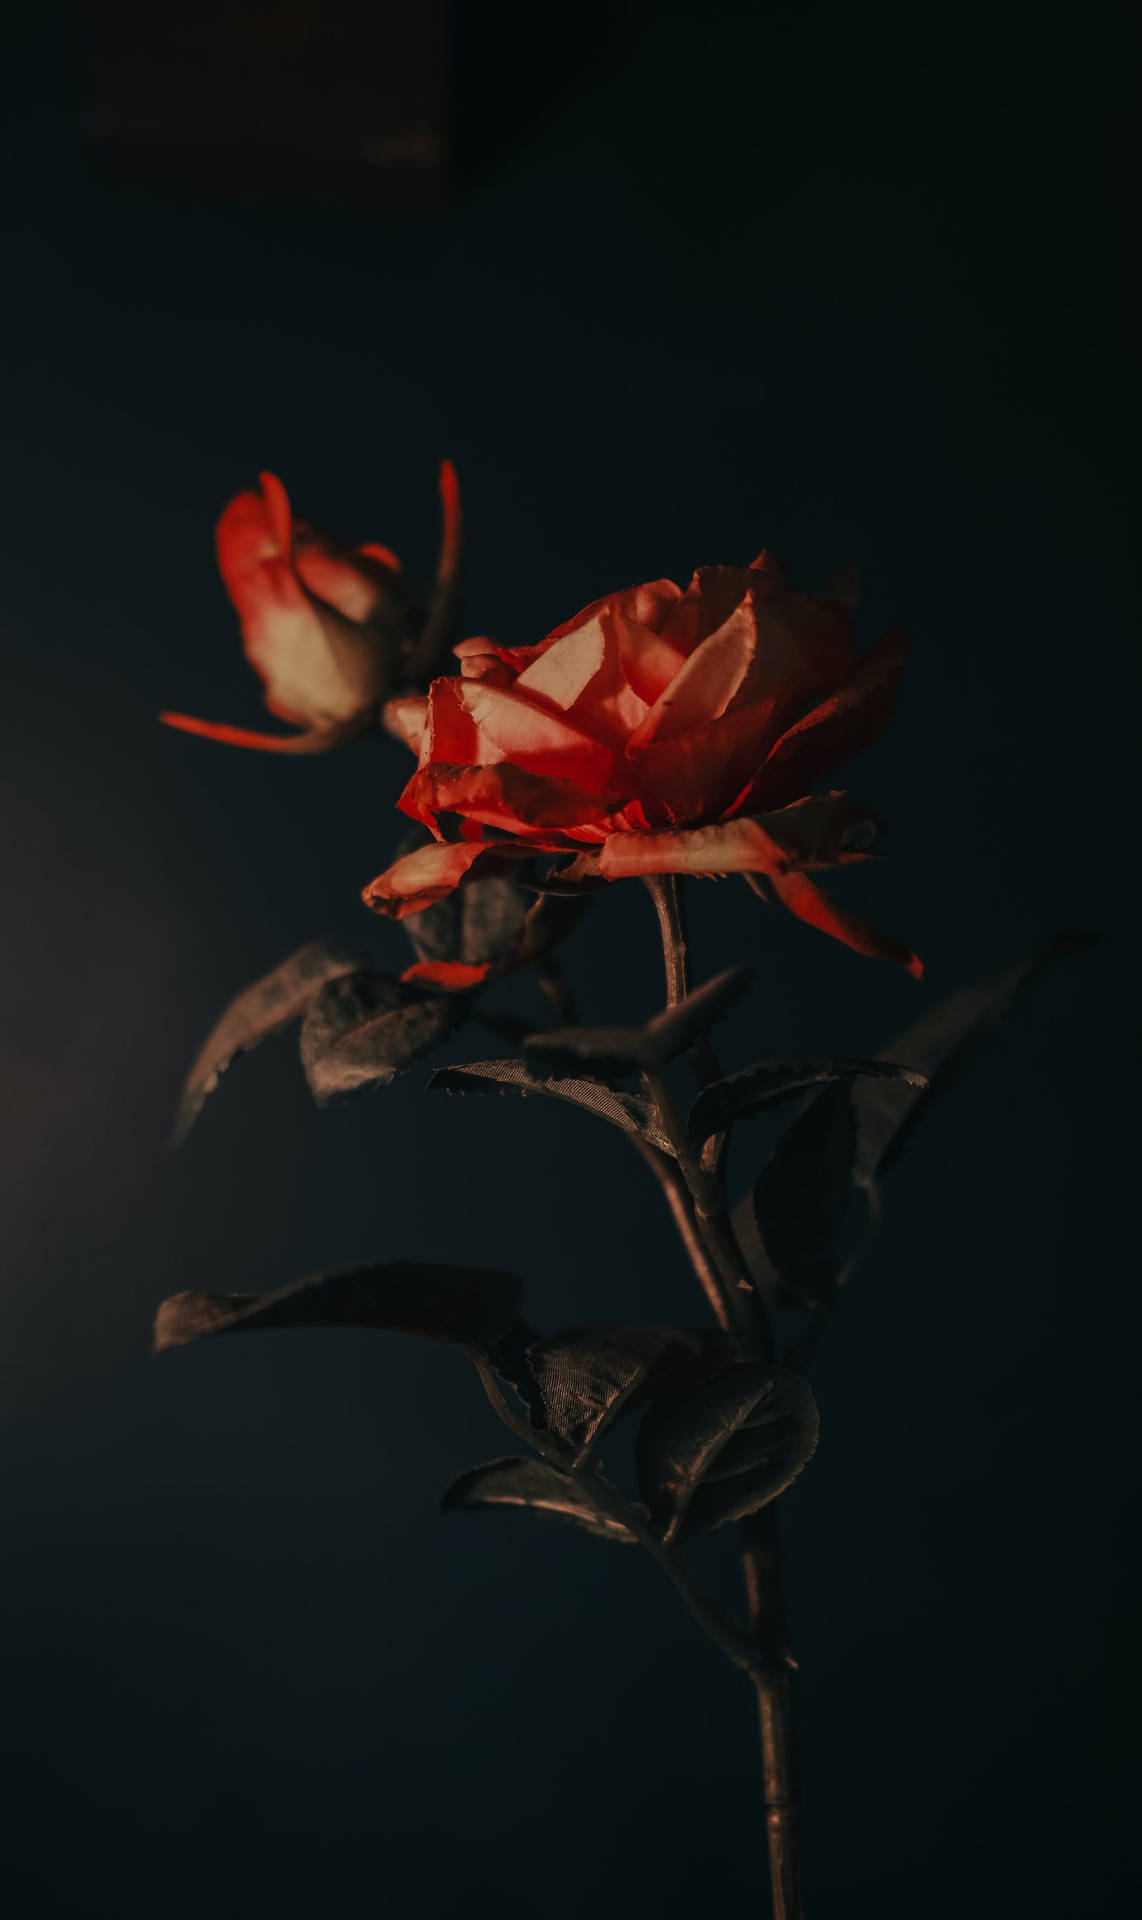 50 Aesthetic Rose iPhone Wallpapers [Free Downloads]